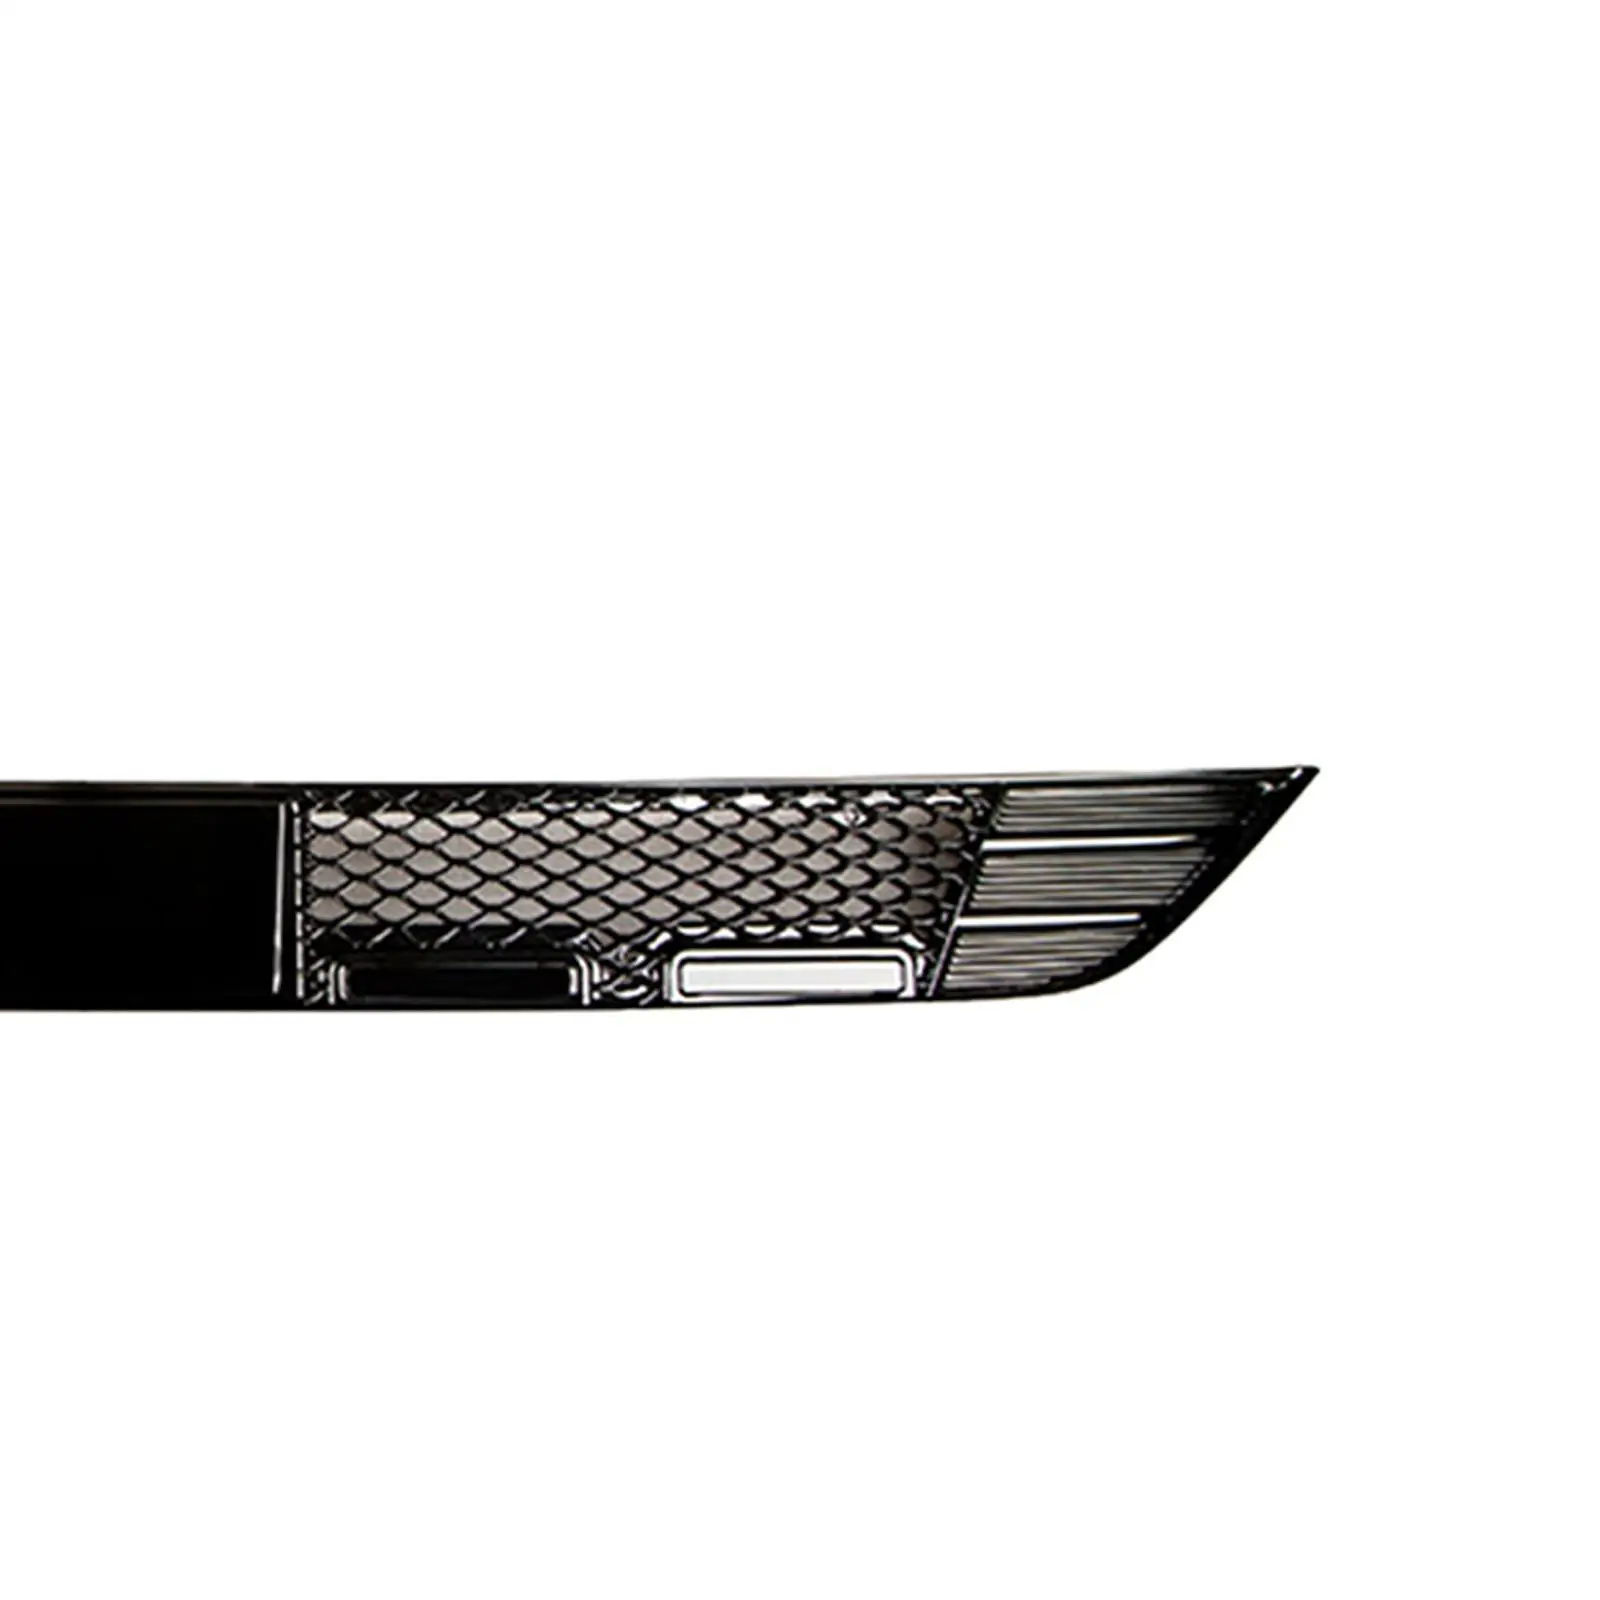 Auto Front Grill Mesh Grille Cover Replacement for Byd Atto 3 Yuan Plus